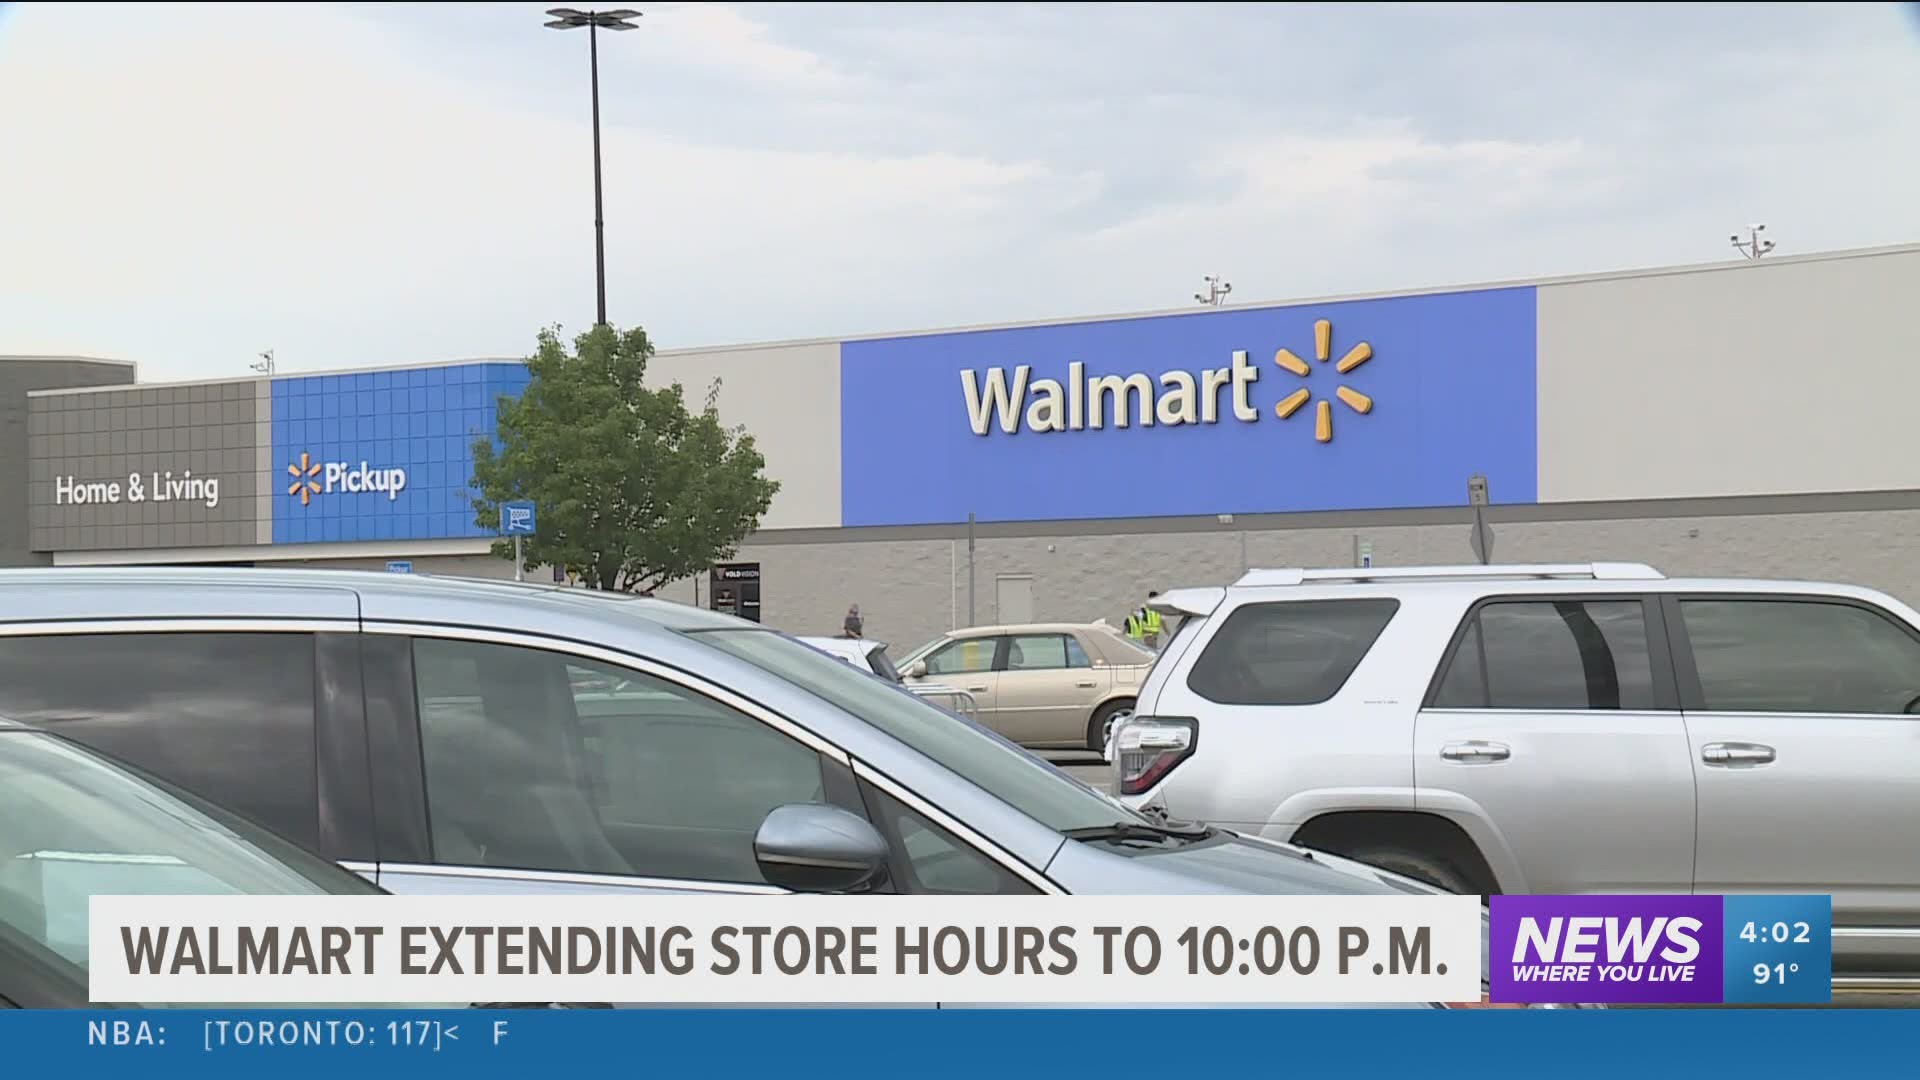 Walmart stores to stay open until 10 p.m.